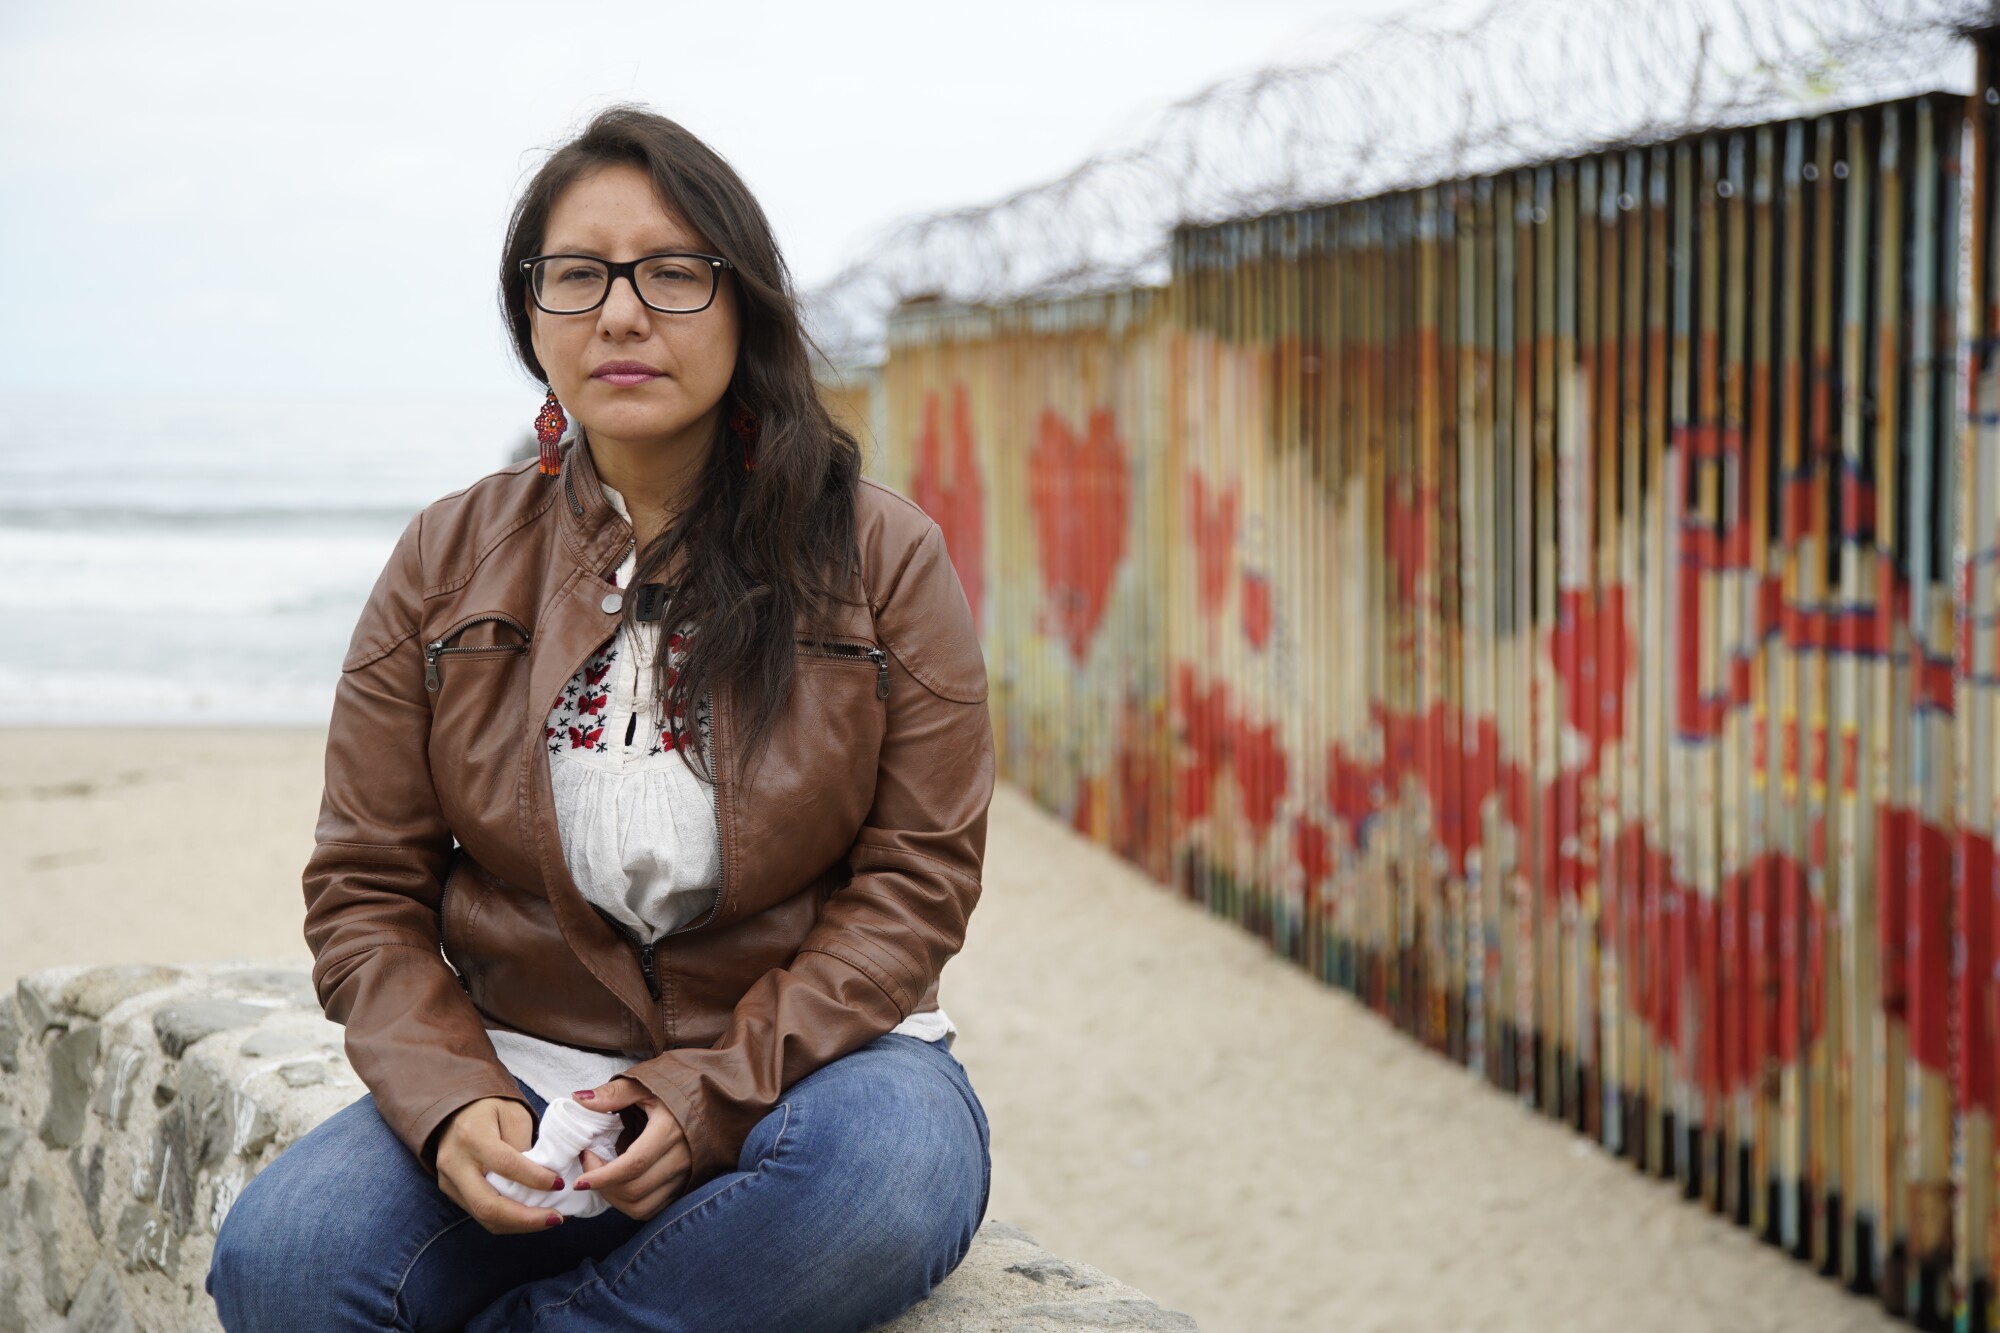 Hot girls caught at us border A Dreamer And Attorney She Returned To Mexico After 30 Years To Find Heartbreak At The Border The San Diego Union Tribune